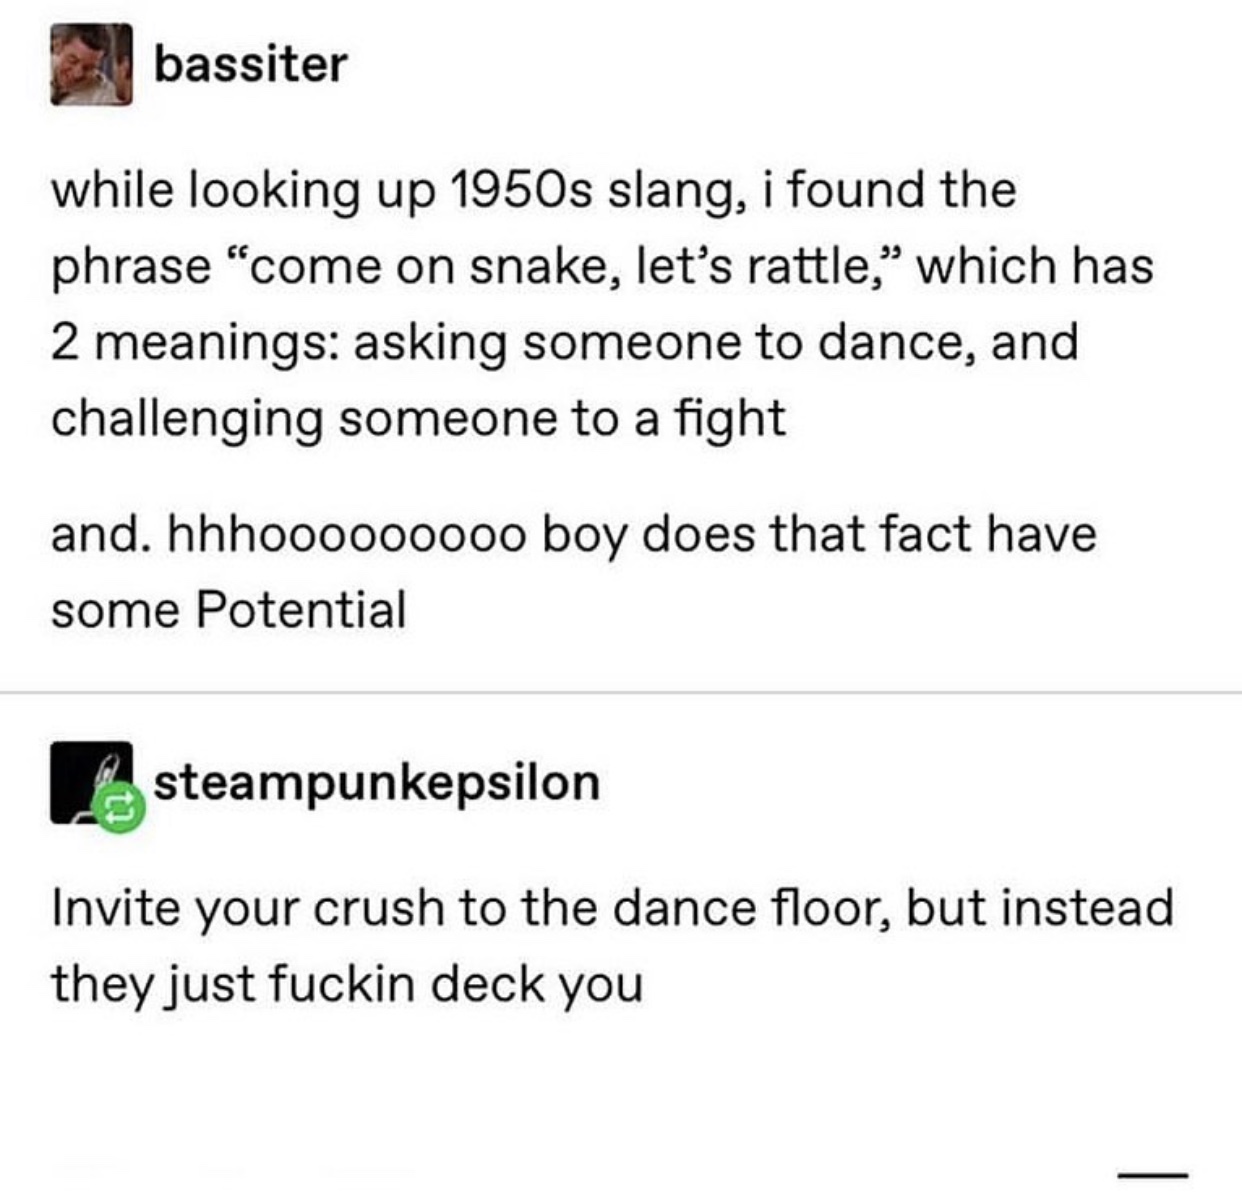 angle - bassiter while looking up 1950s slang, i found the phrase "come on snake, let's rattle," which has 2 meanings asking someone to dance, and challenging someone to a fight and. hhhoooo00000 boy does that fact have some Potential steampunkepsilon Inv